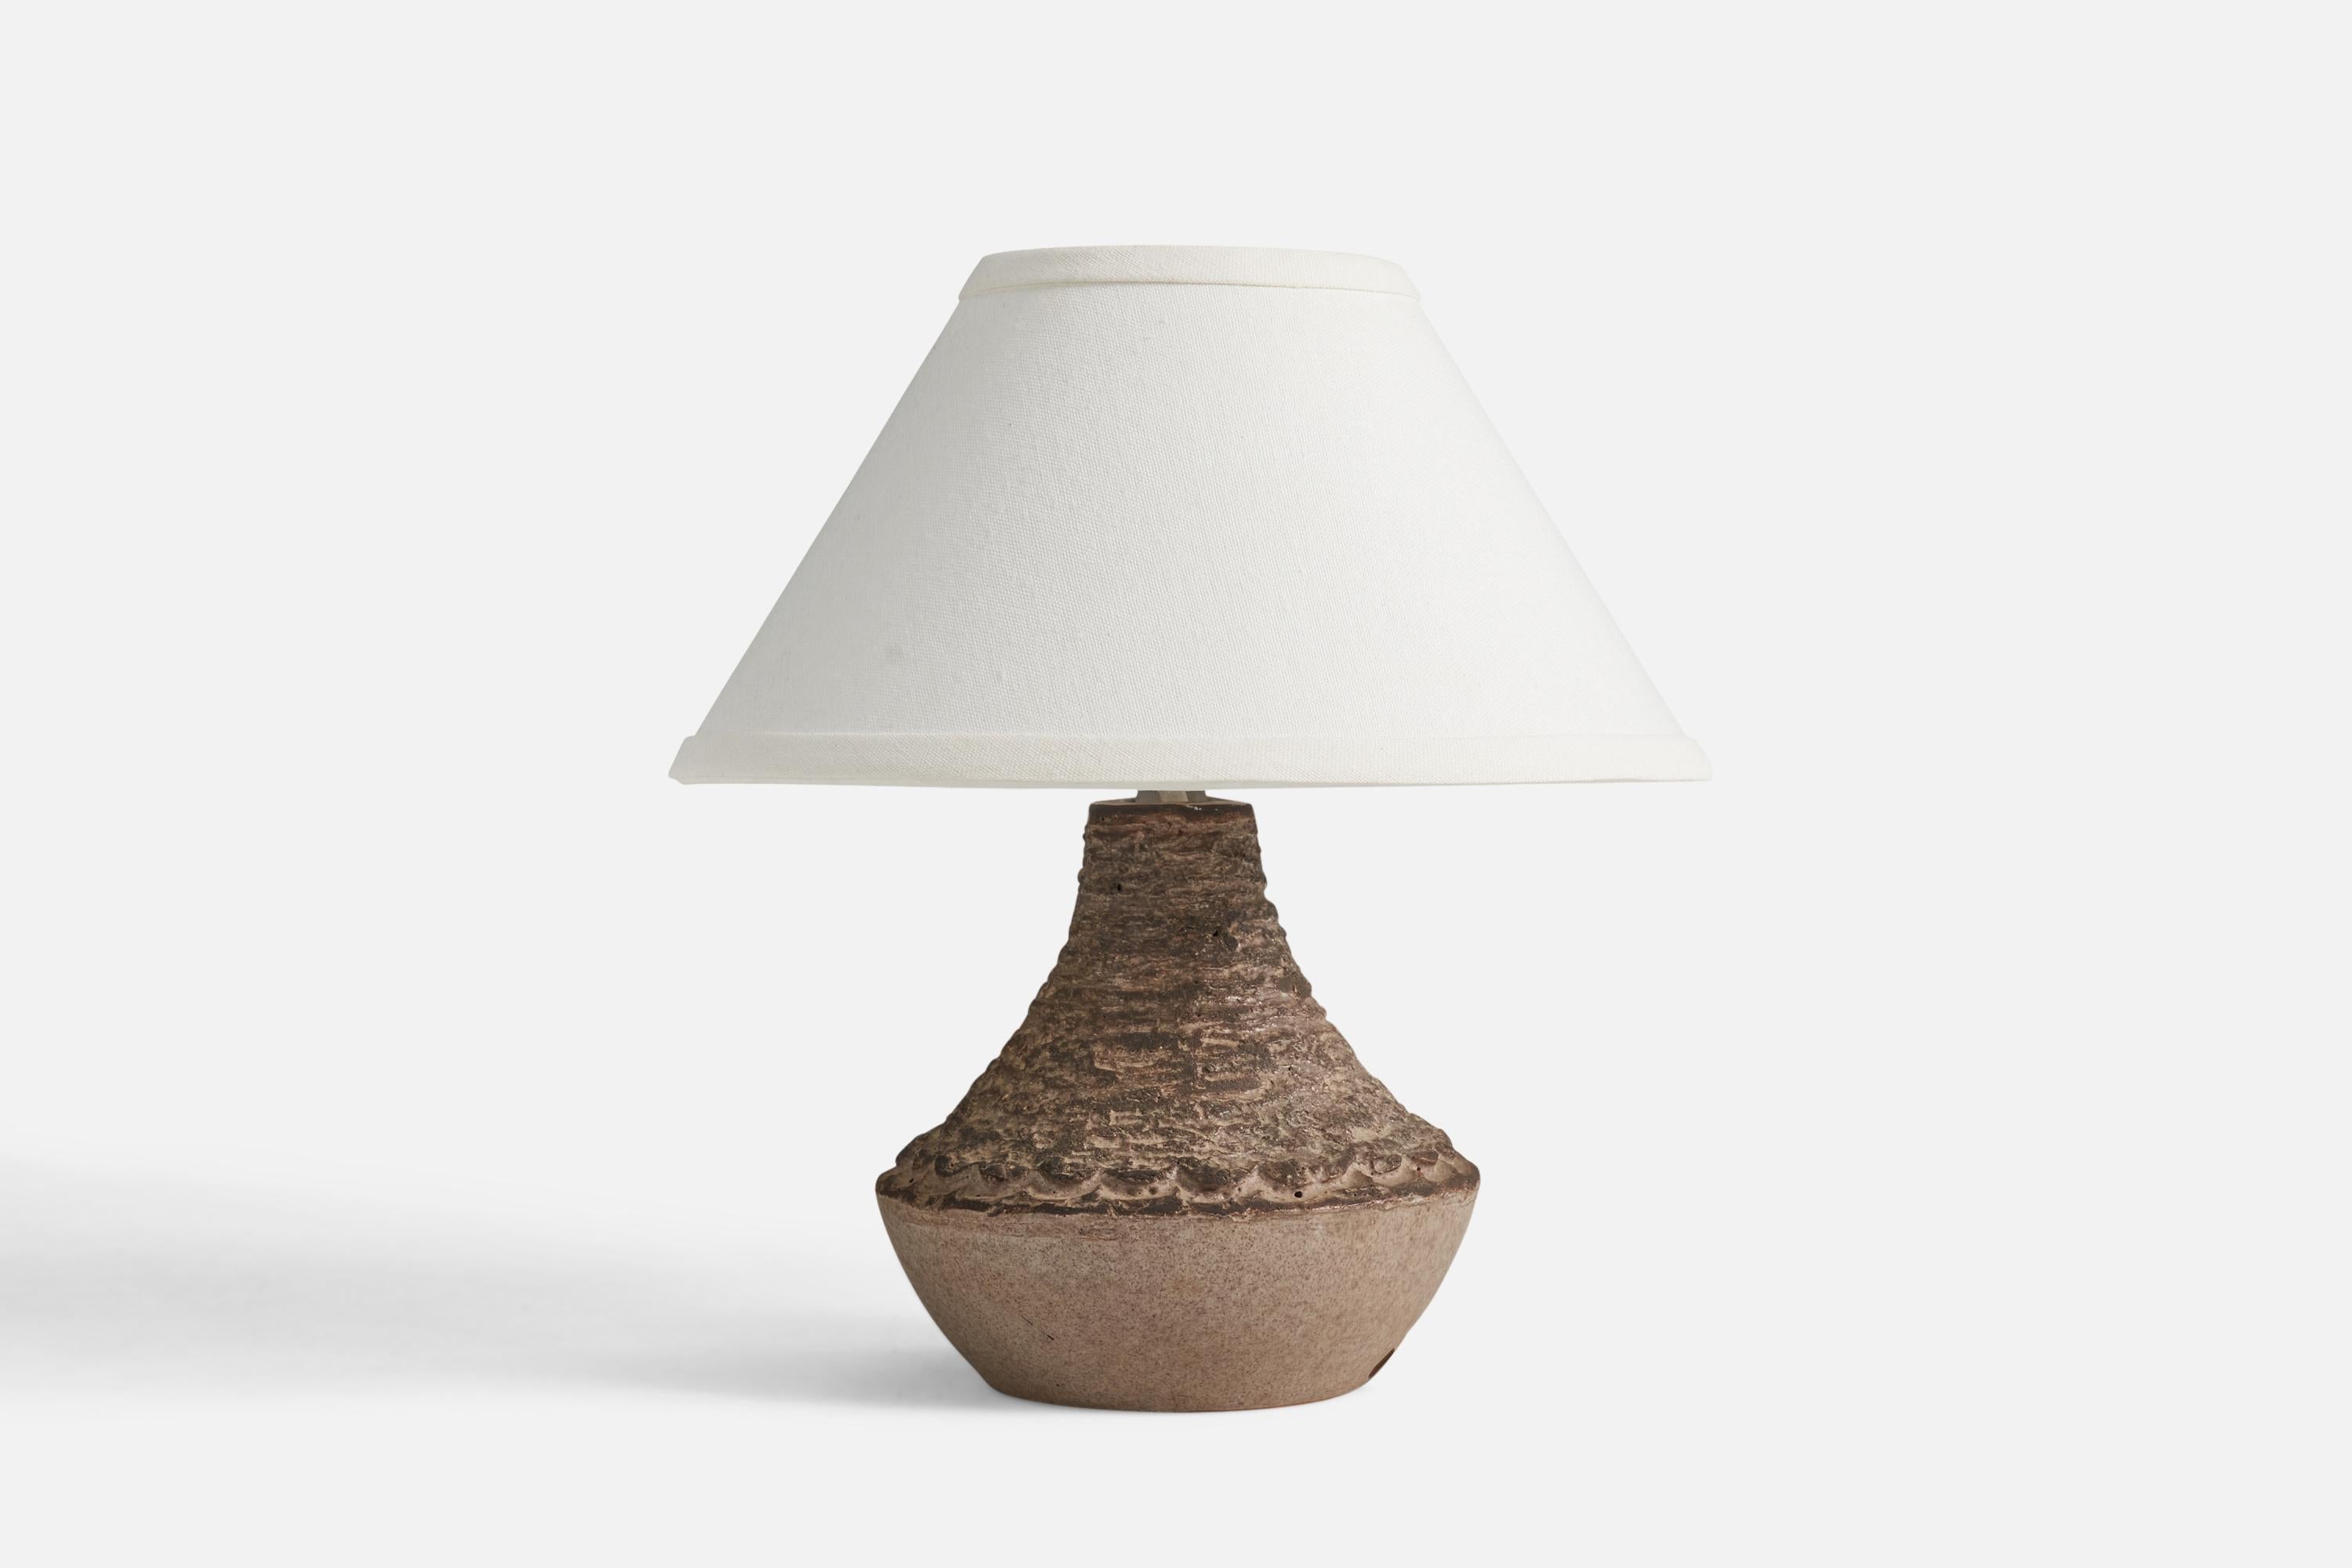 A stoneware table lamp designed and produced by a Mykyrka Keramik, Sweden, 1960s.

Dimensions of lamp (inches) : 8.2 x 6 x 6 (Height x Width x Depth)
Dimensions of lampshade (inches) : 4.25 x 10.25 x 6 (Top Diameter x Bottom Diameter x